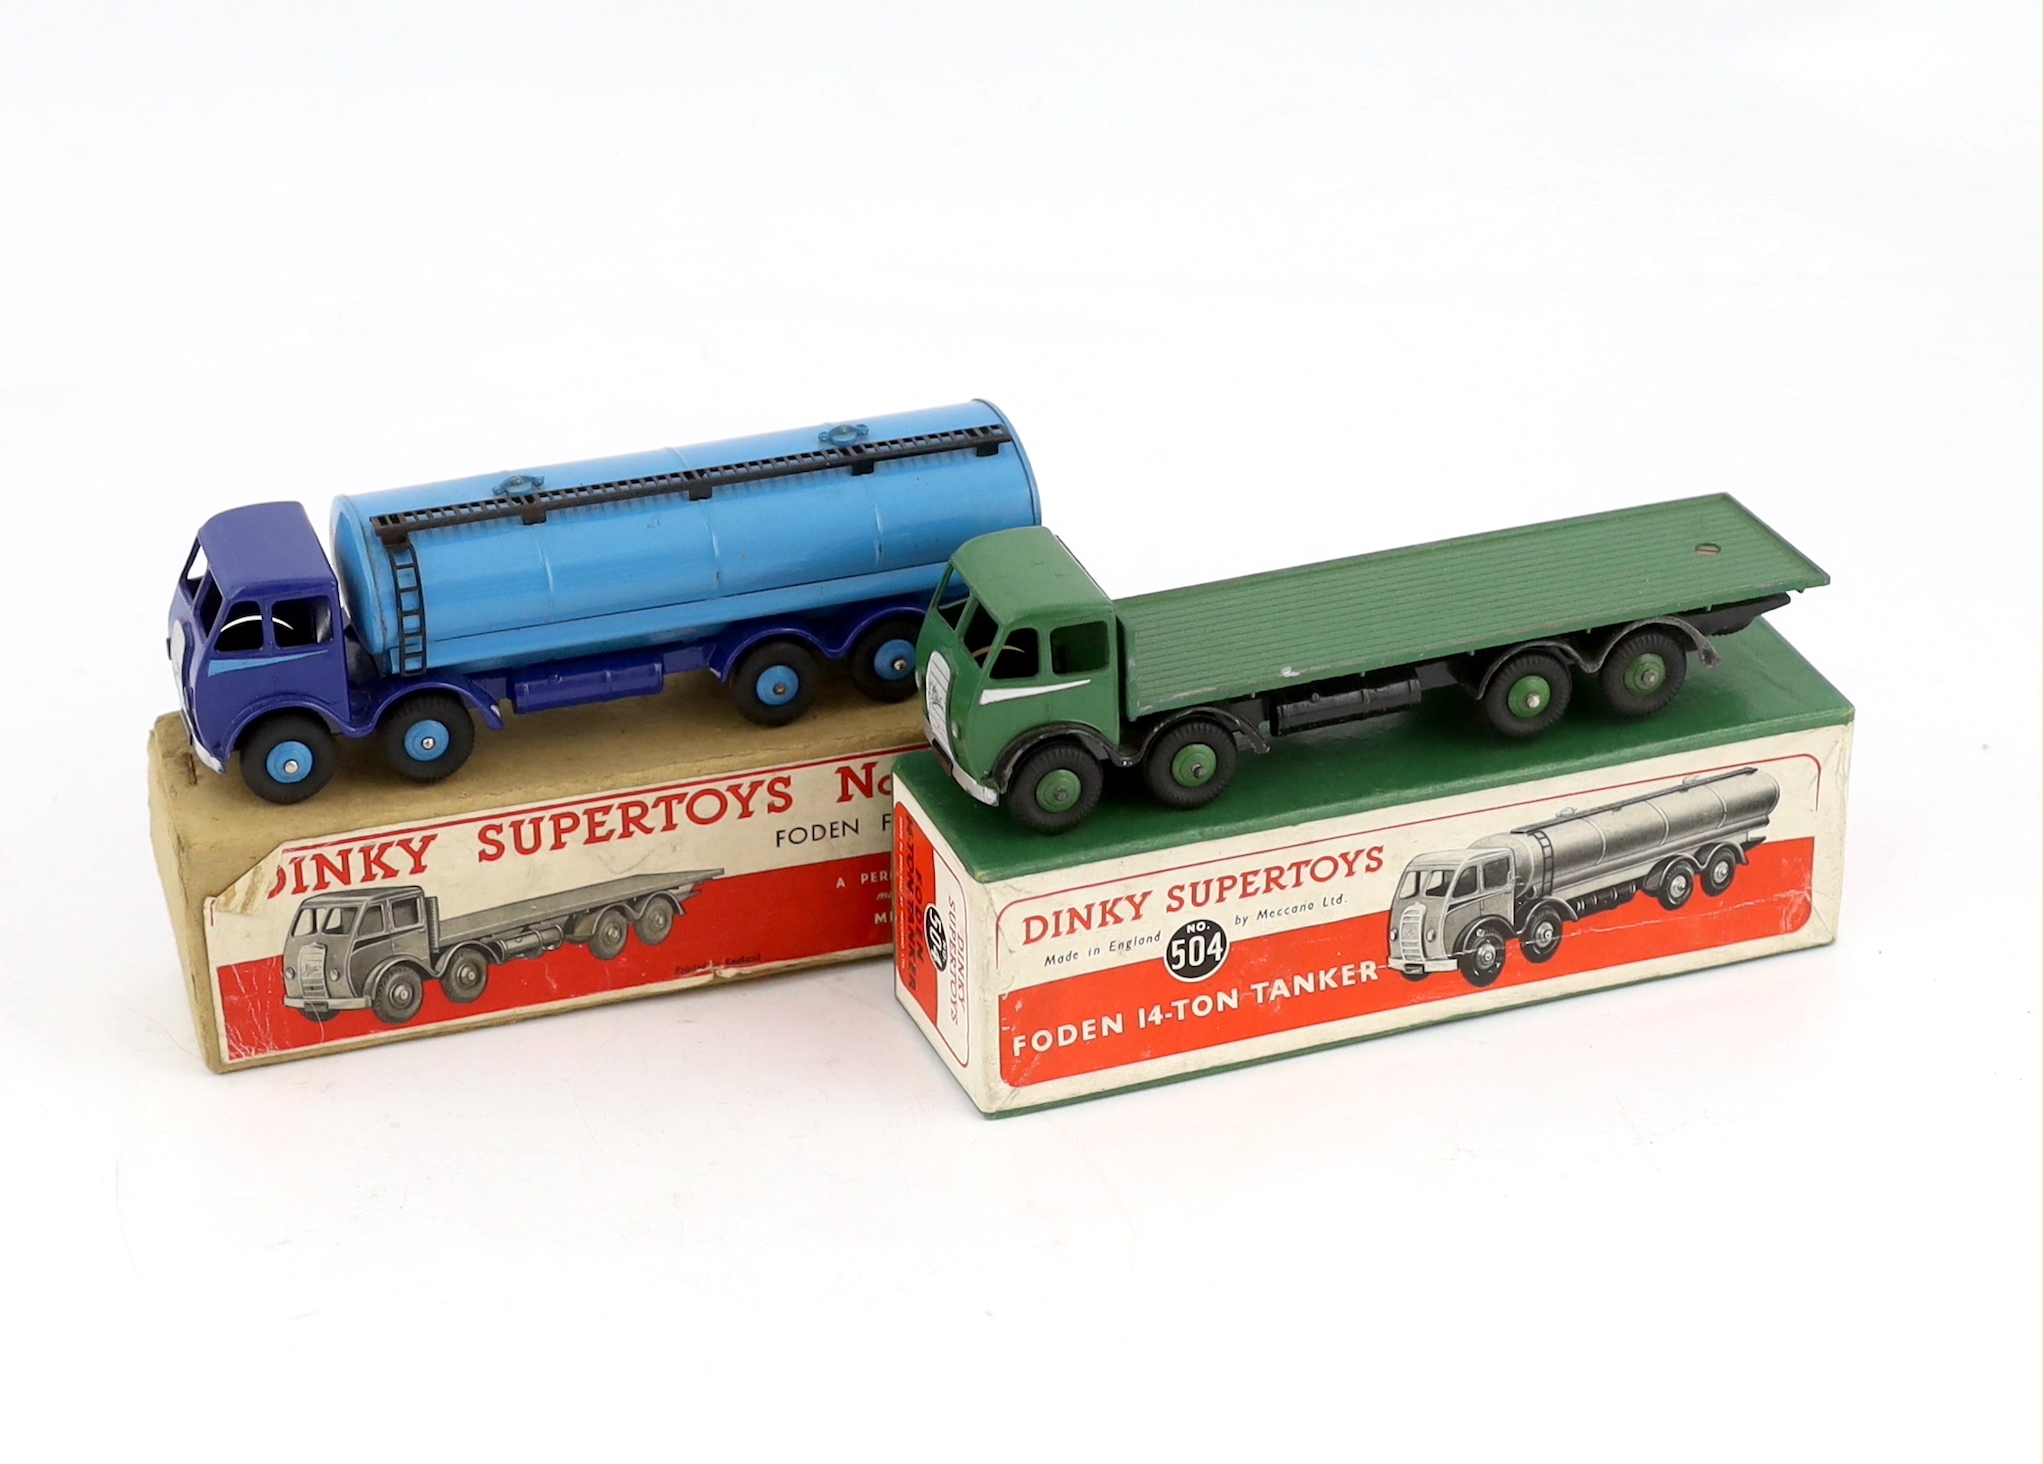 Two boxed Dinky Supertoys first type Fodens; a 14-ton tanker (504), with dark blue cab and chassis, and pale blue tank and wheels and a Flat Truck (502), in green with silver flash, in correct colour-marked box